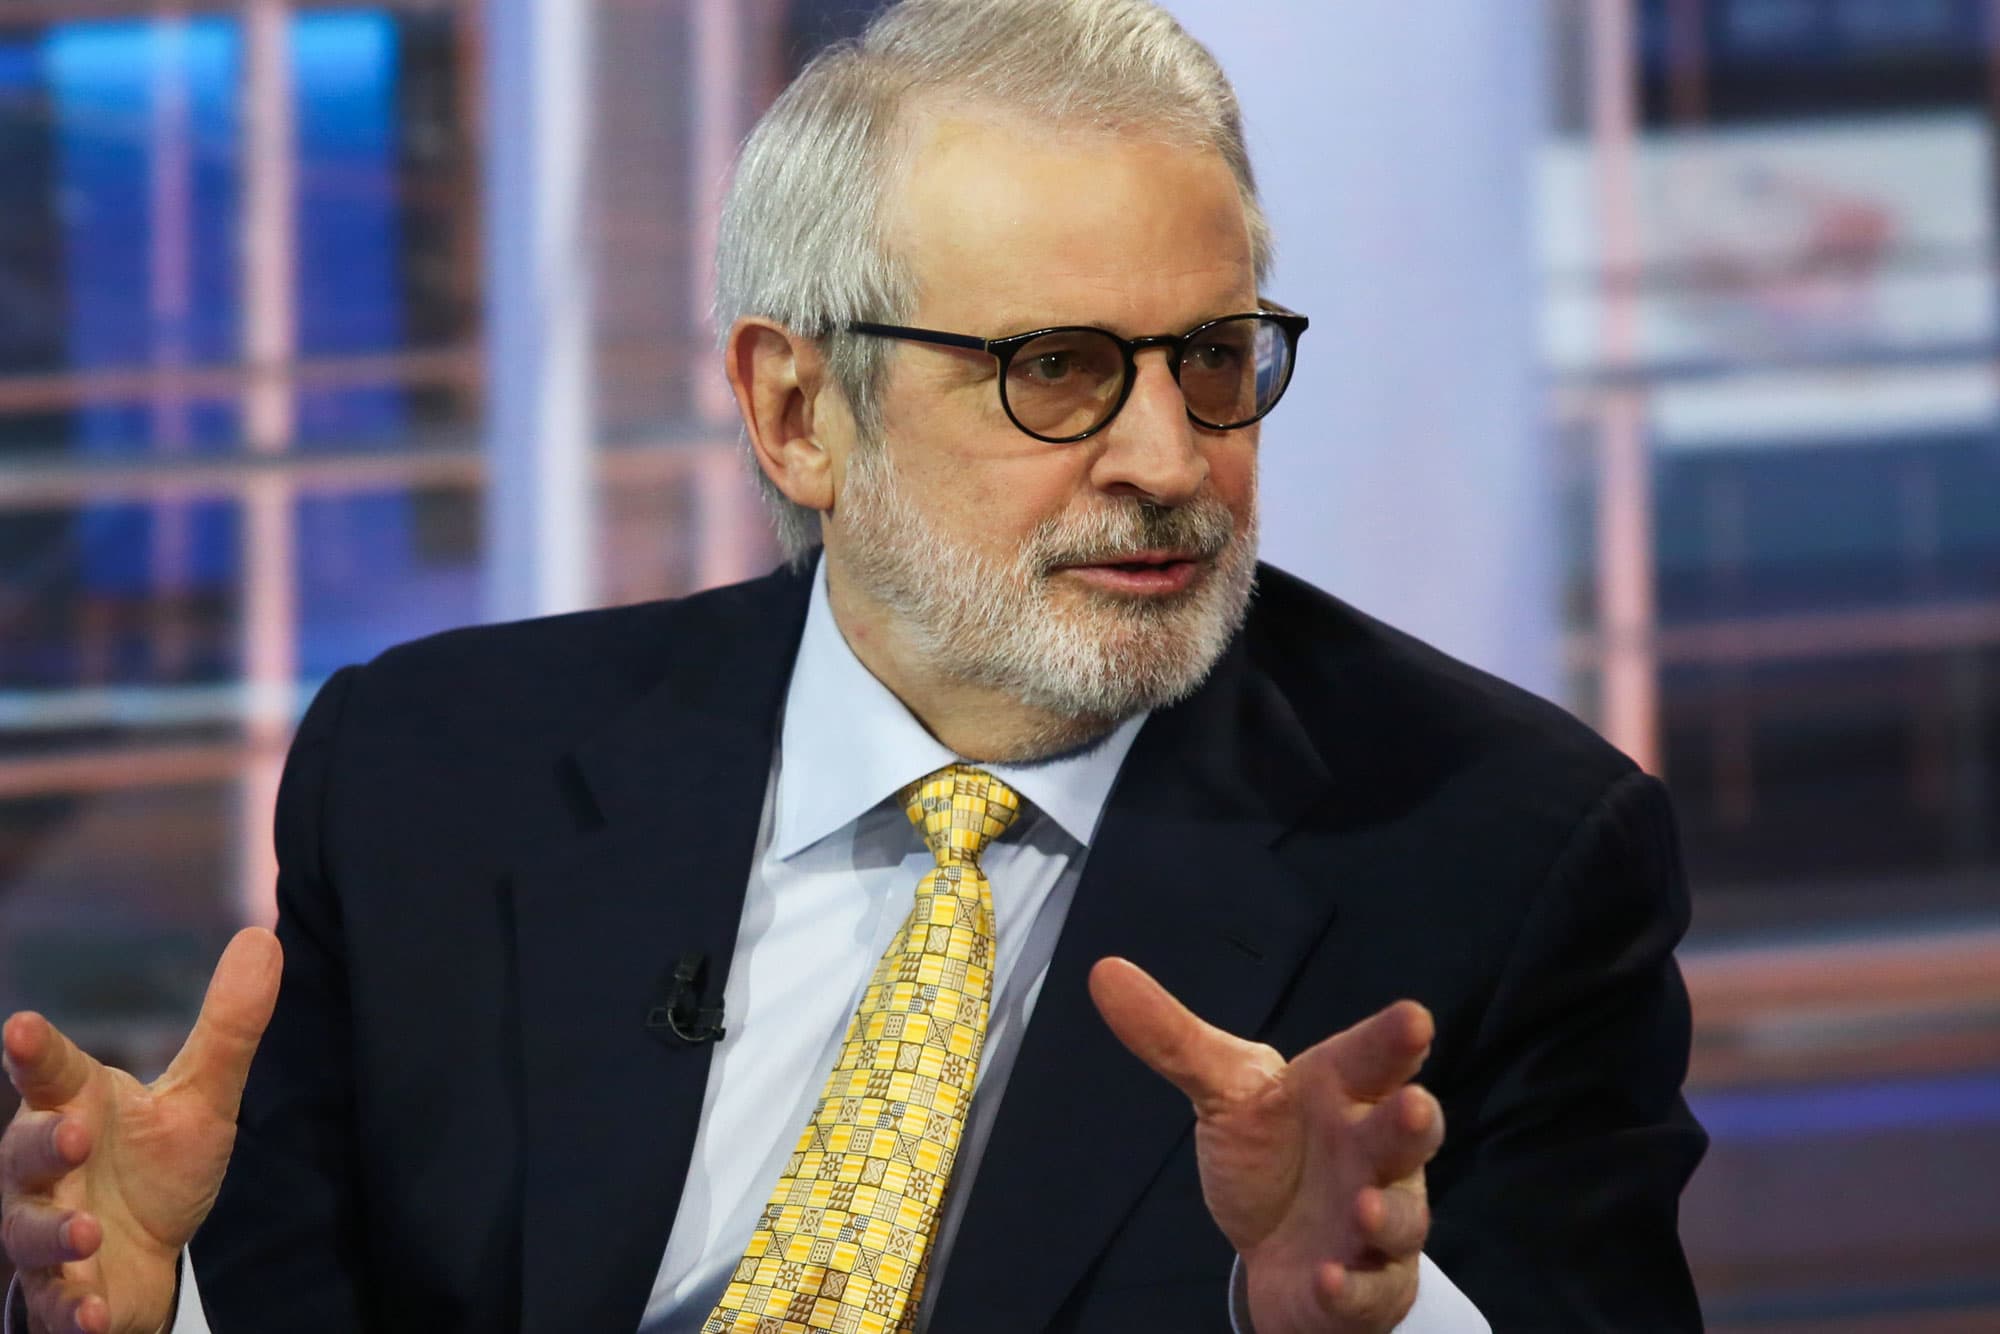 Image result for David Stockman says coronavirus is sparking a financial crisis, warns ‘Wall Street is toast’